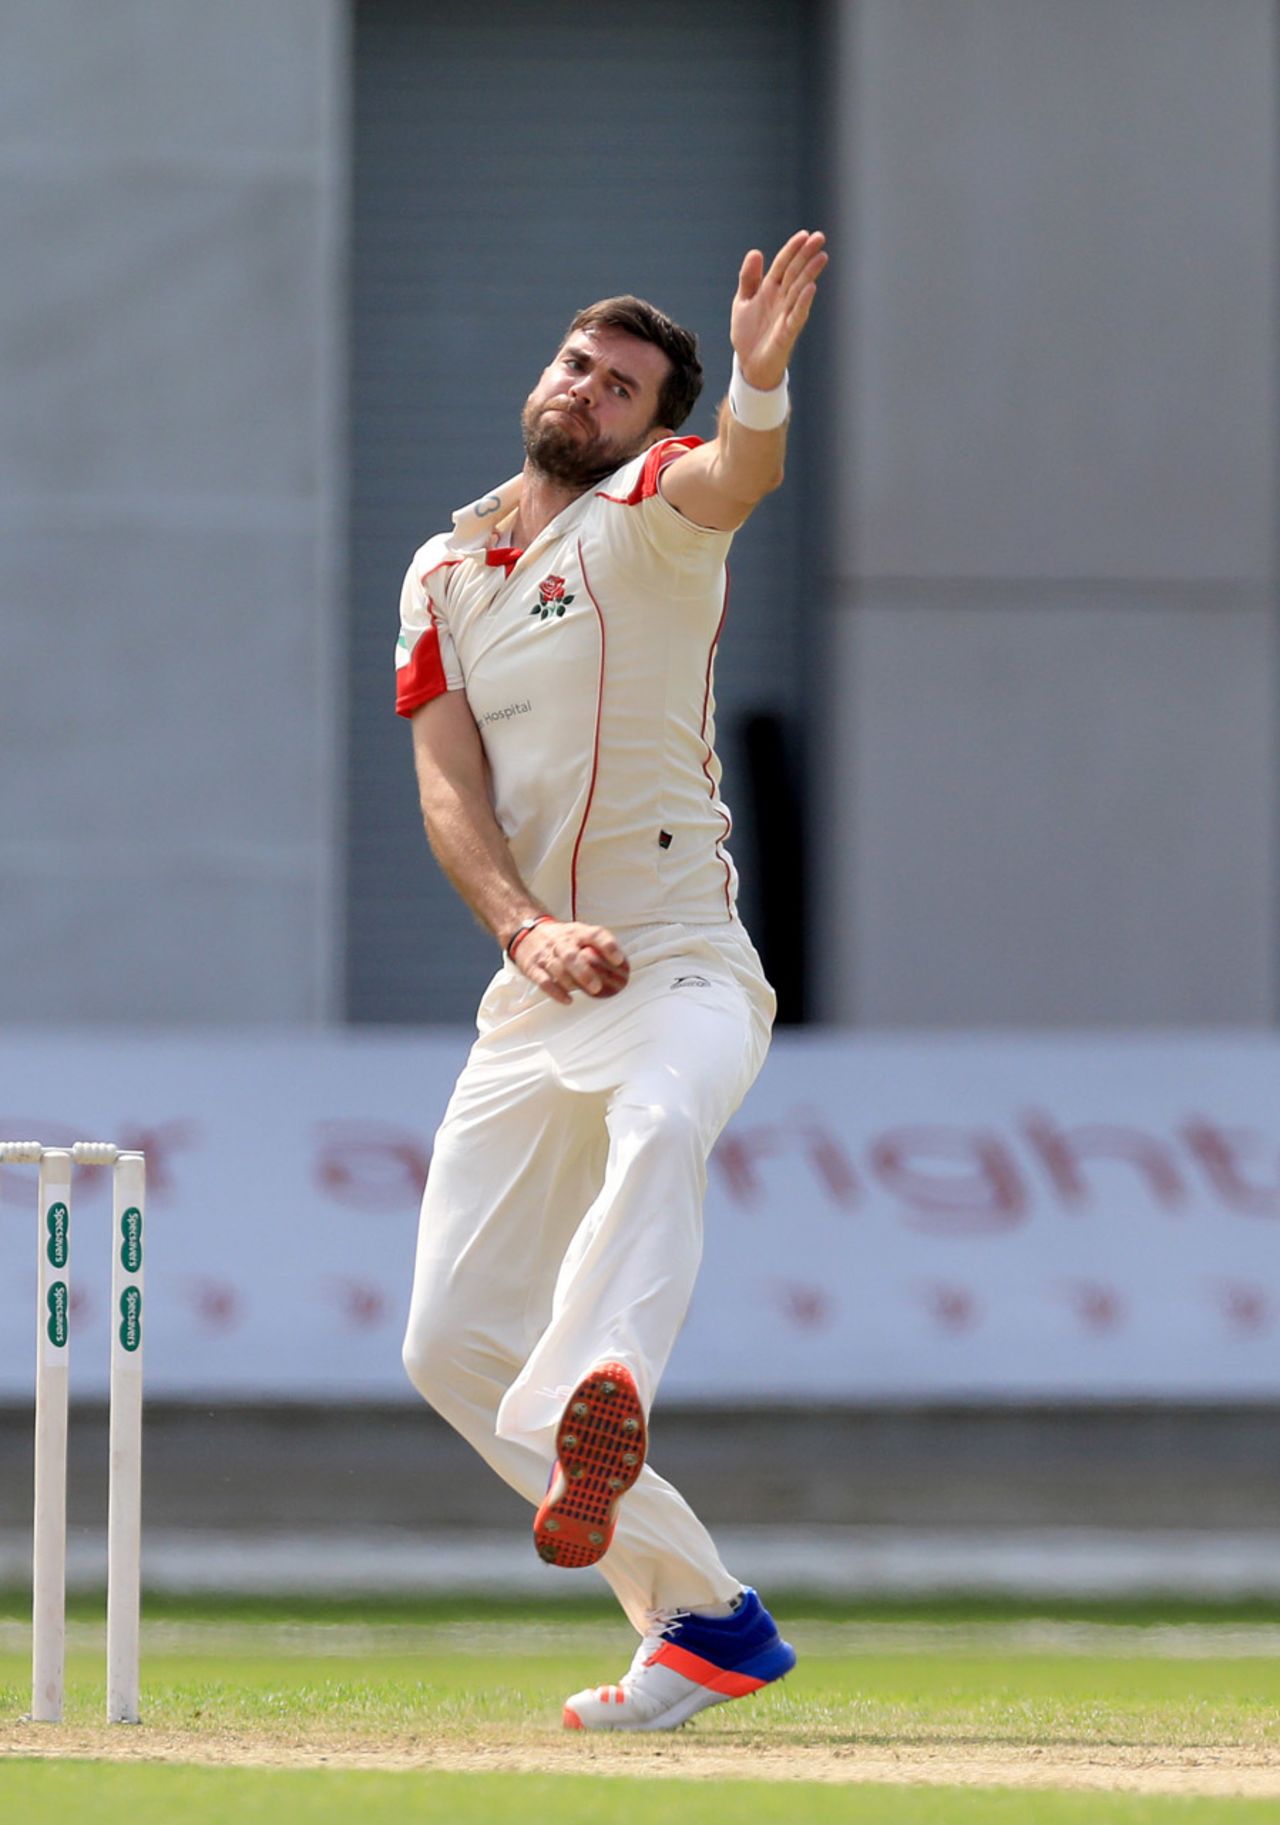 Lancashire still have the services of a heavily-bearded James Anderson, Lancashire v Hampshire, Specsavers Championship Division One, Old Trafford, June 19, 2017